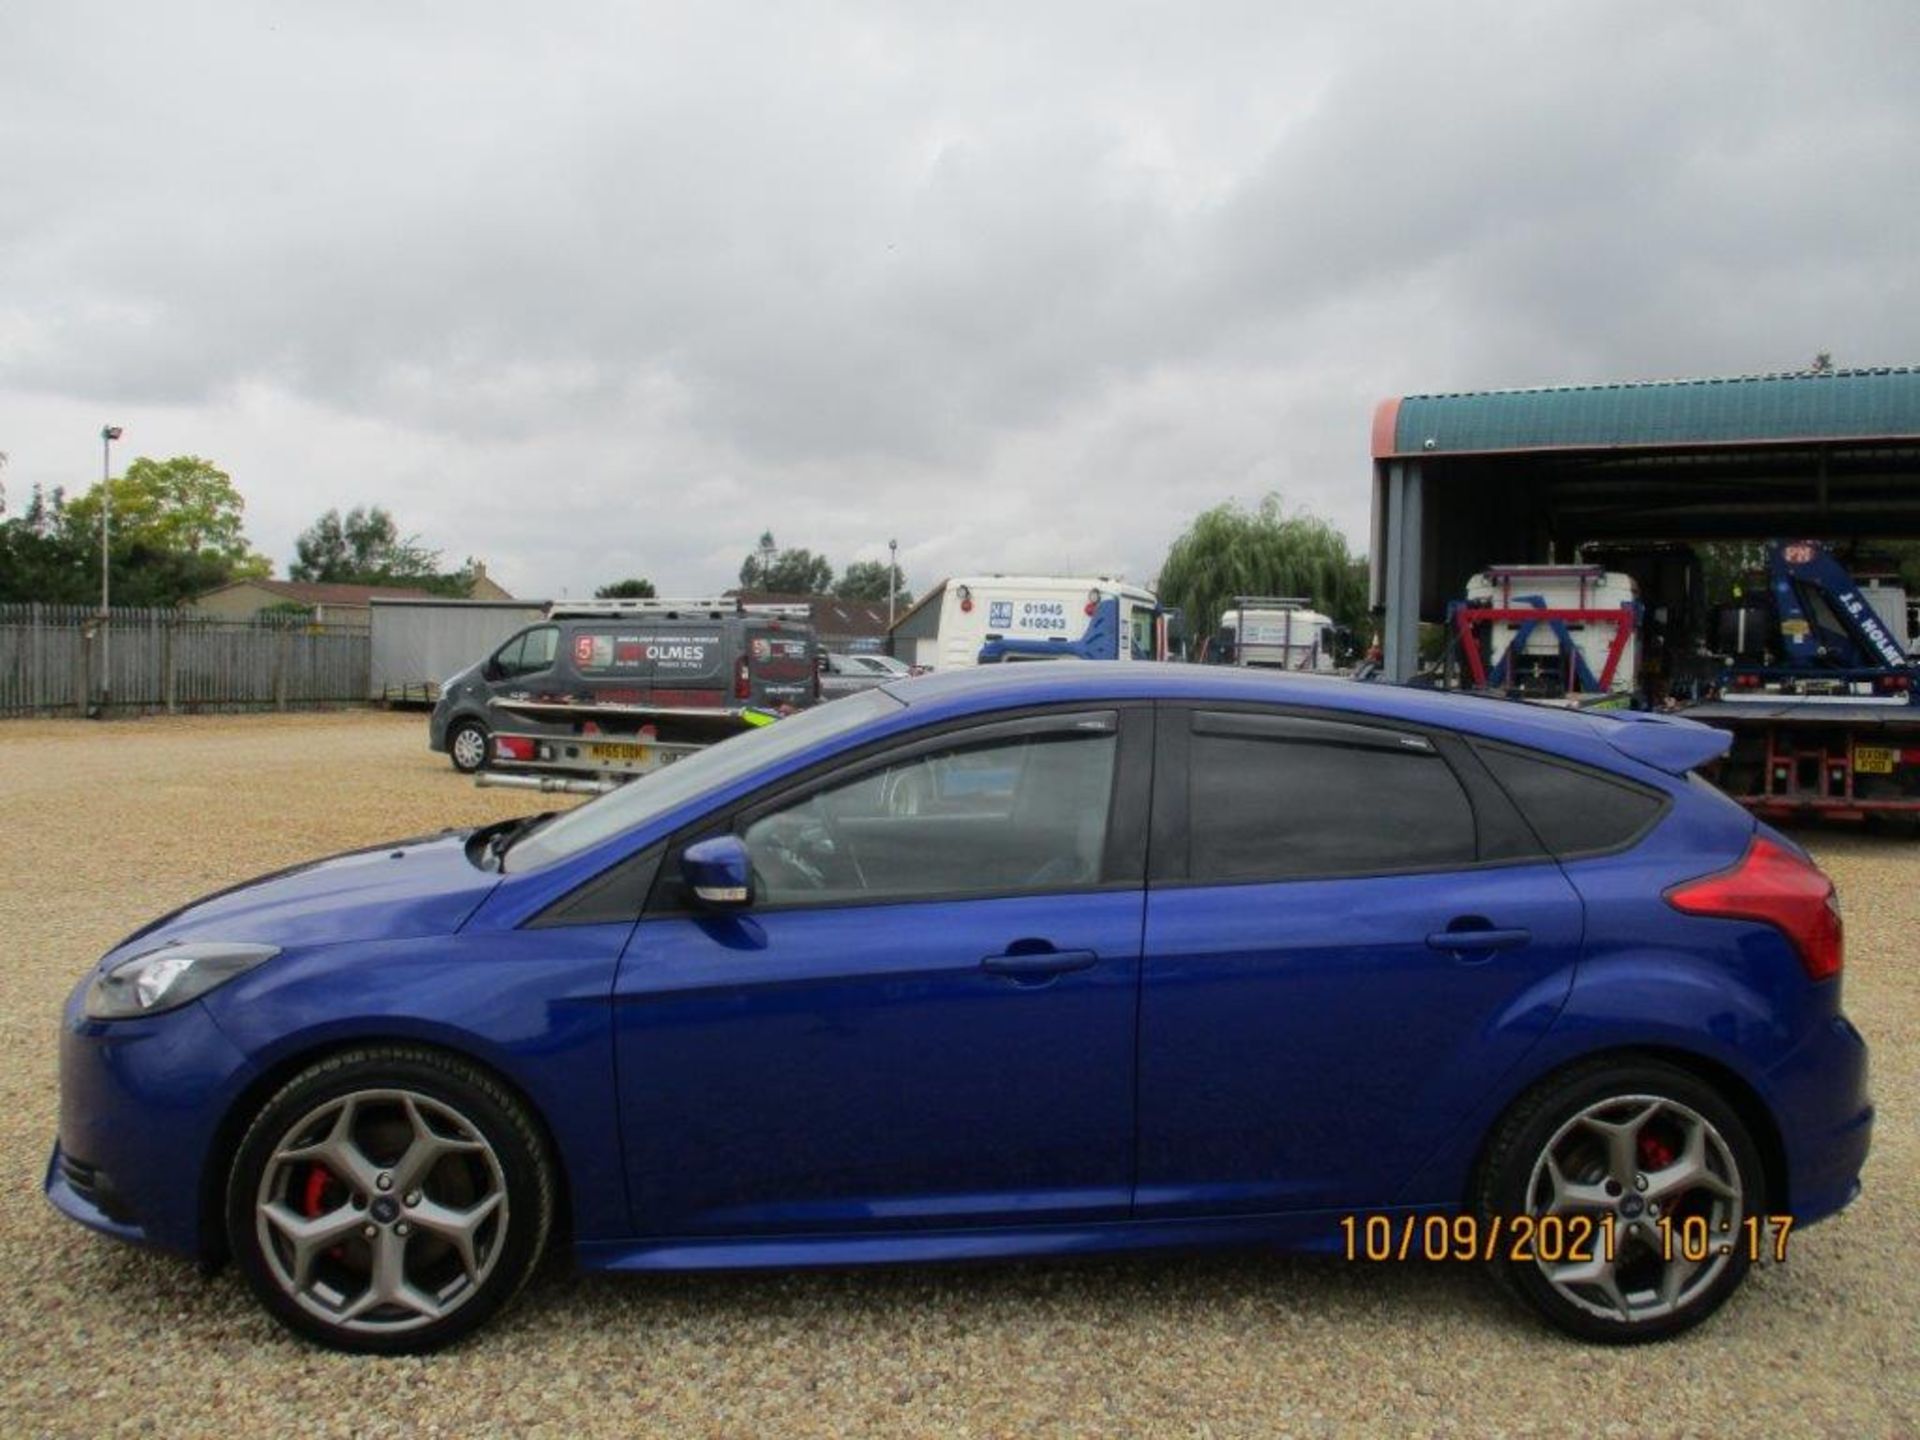 62 12 Ford Focus ST-2 Turbo - Image 2 of 31